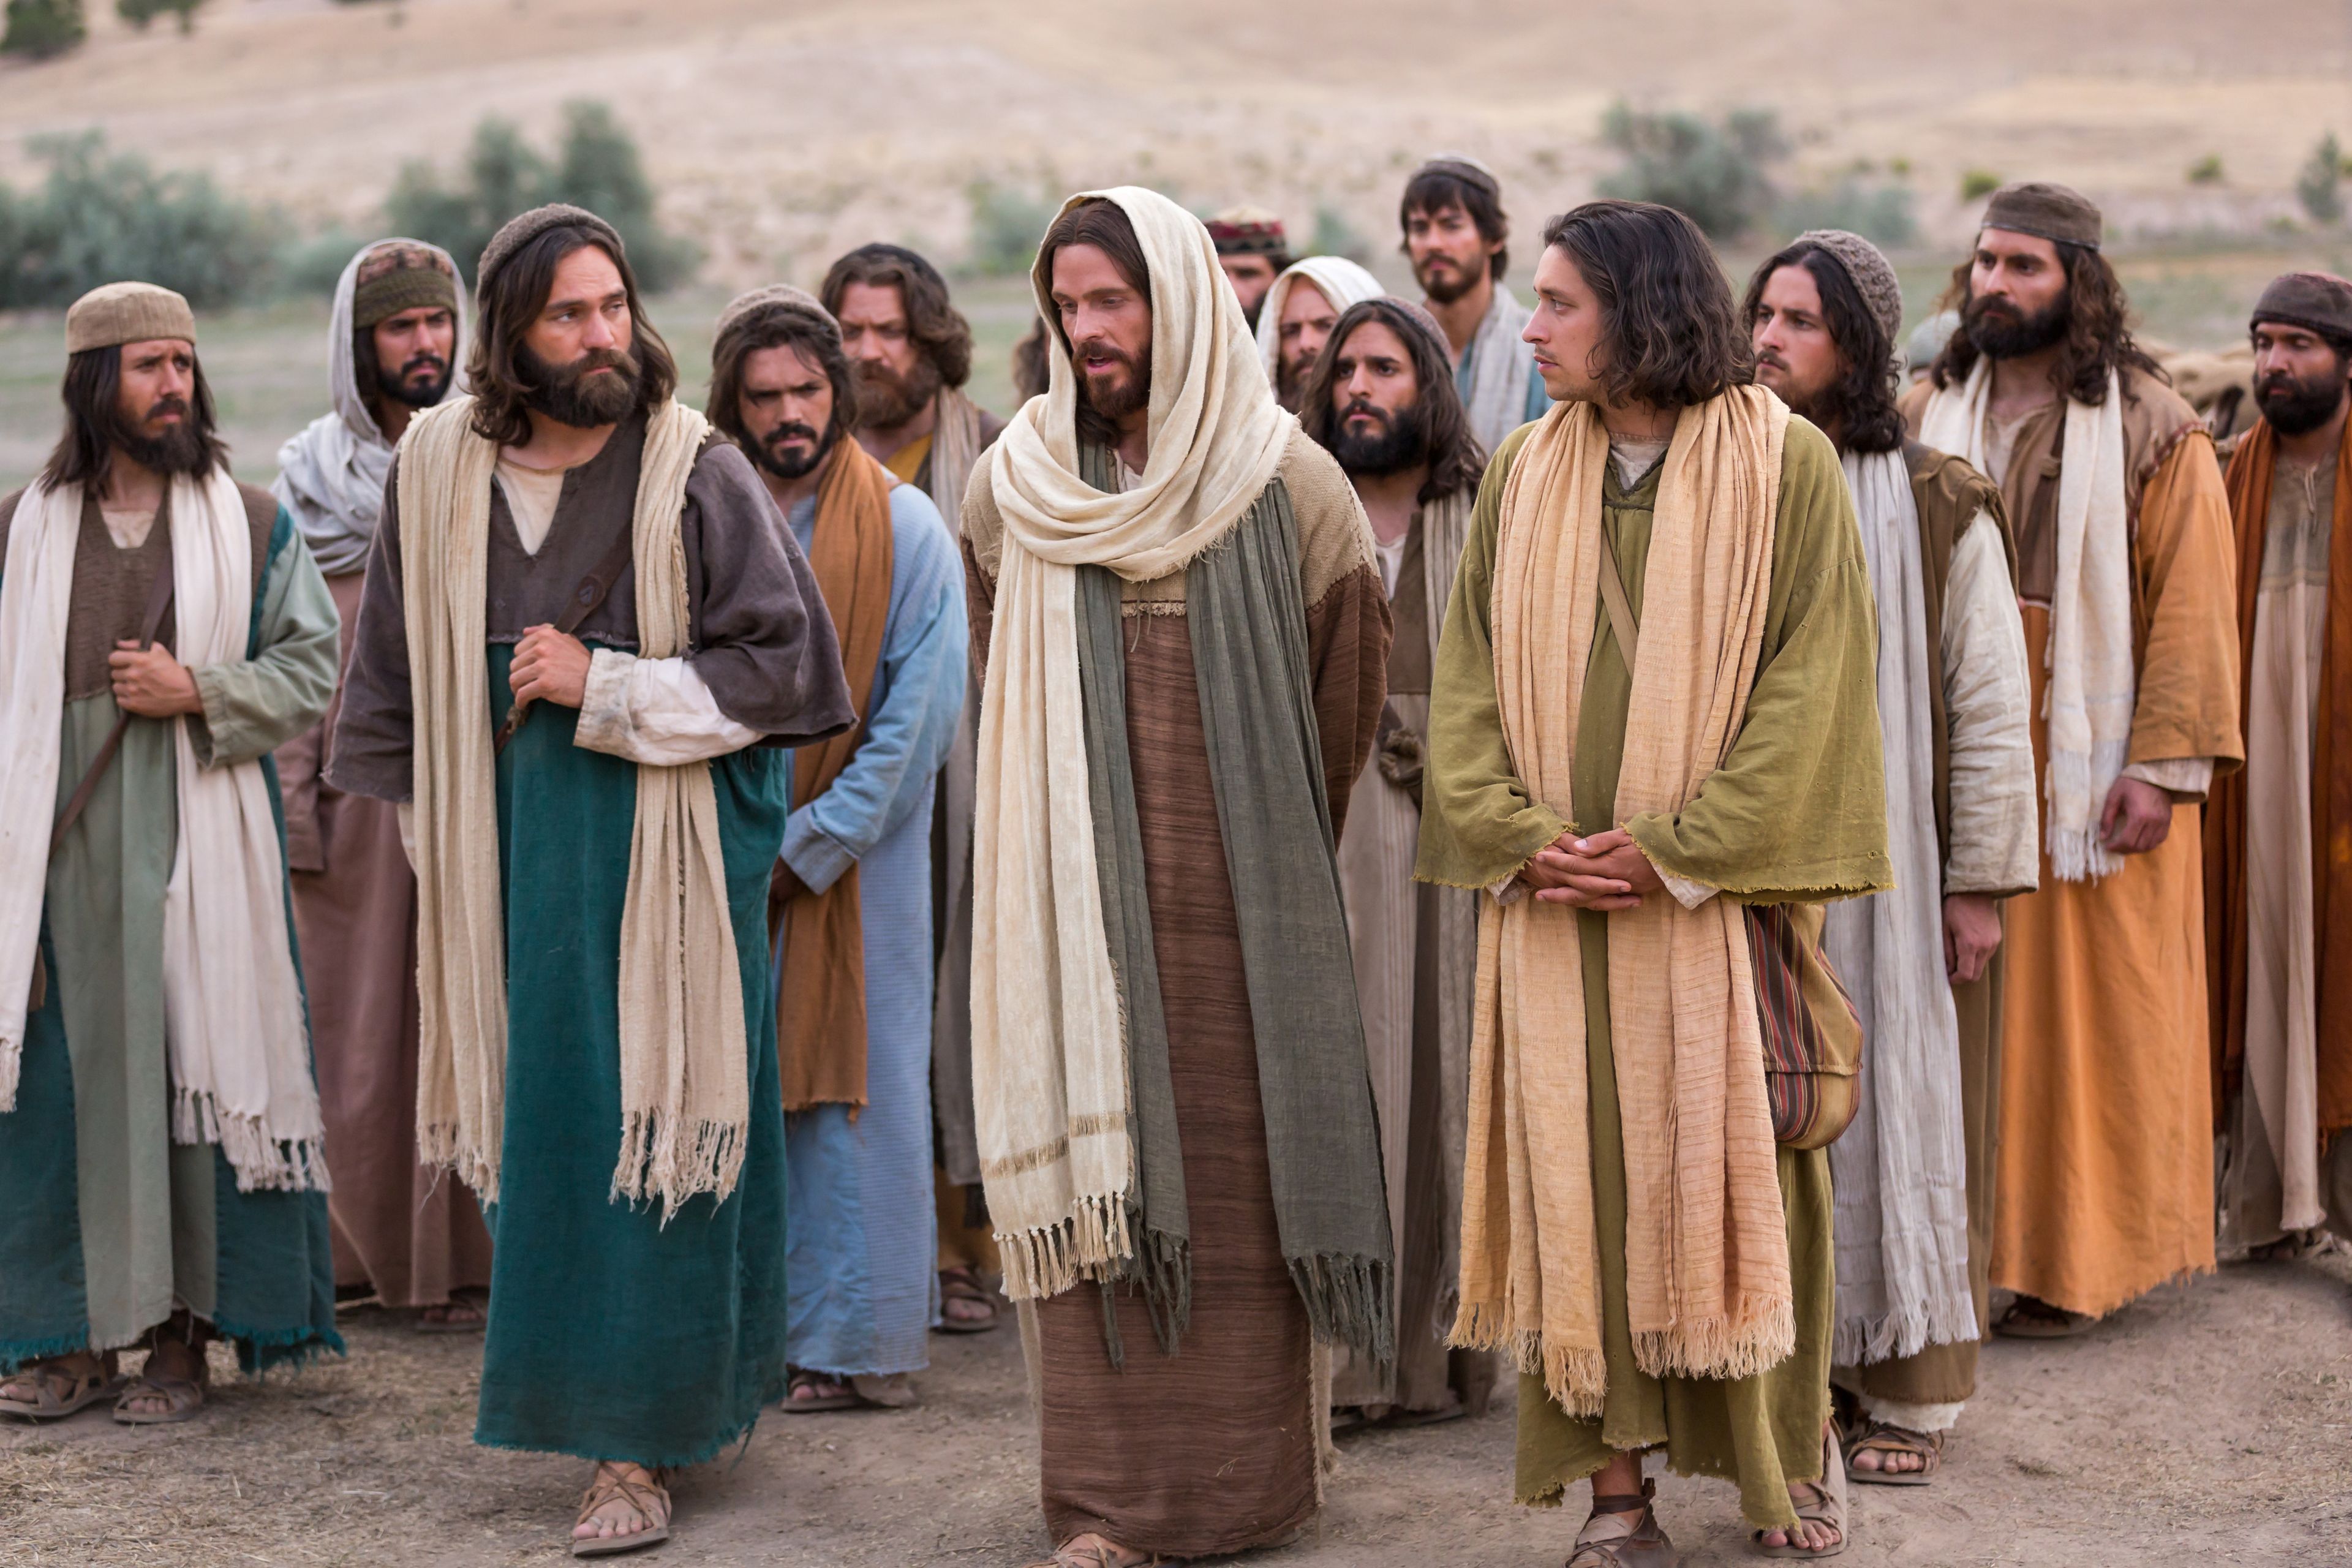 Christ teaches John and the other Apostles that “with God all things are possible.”